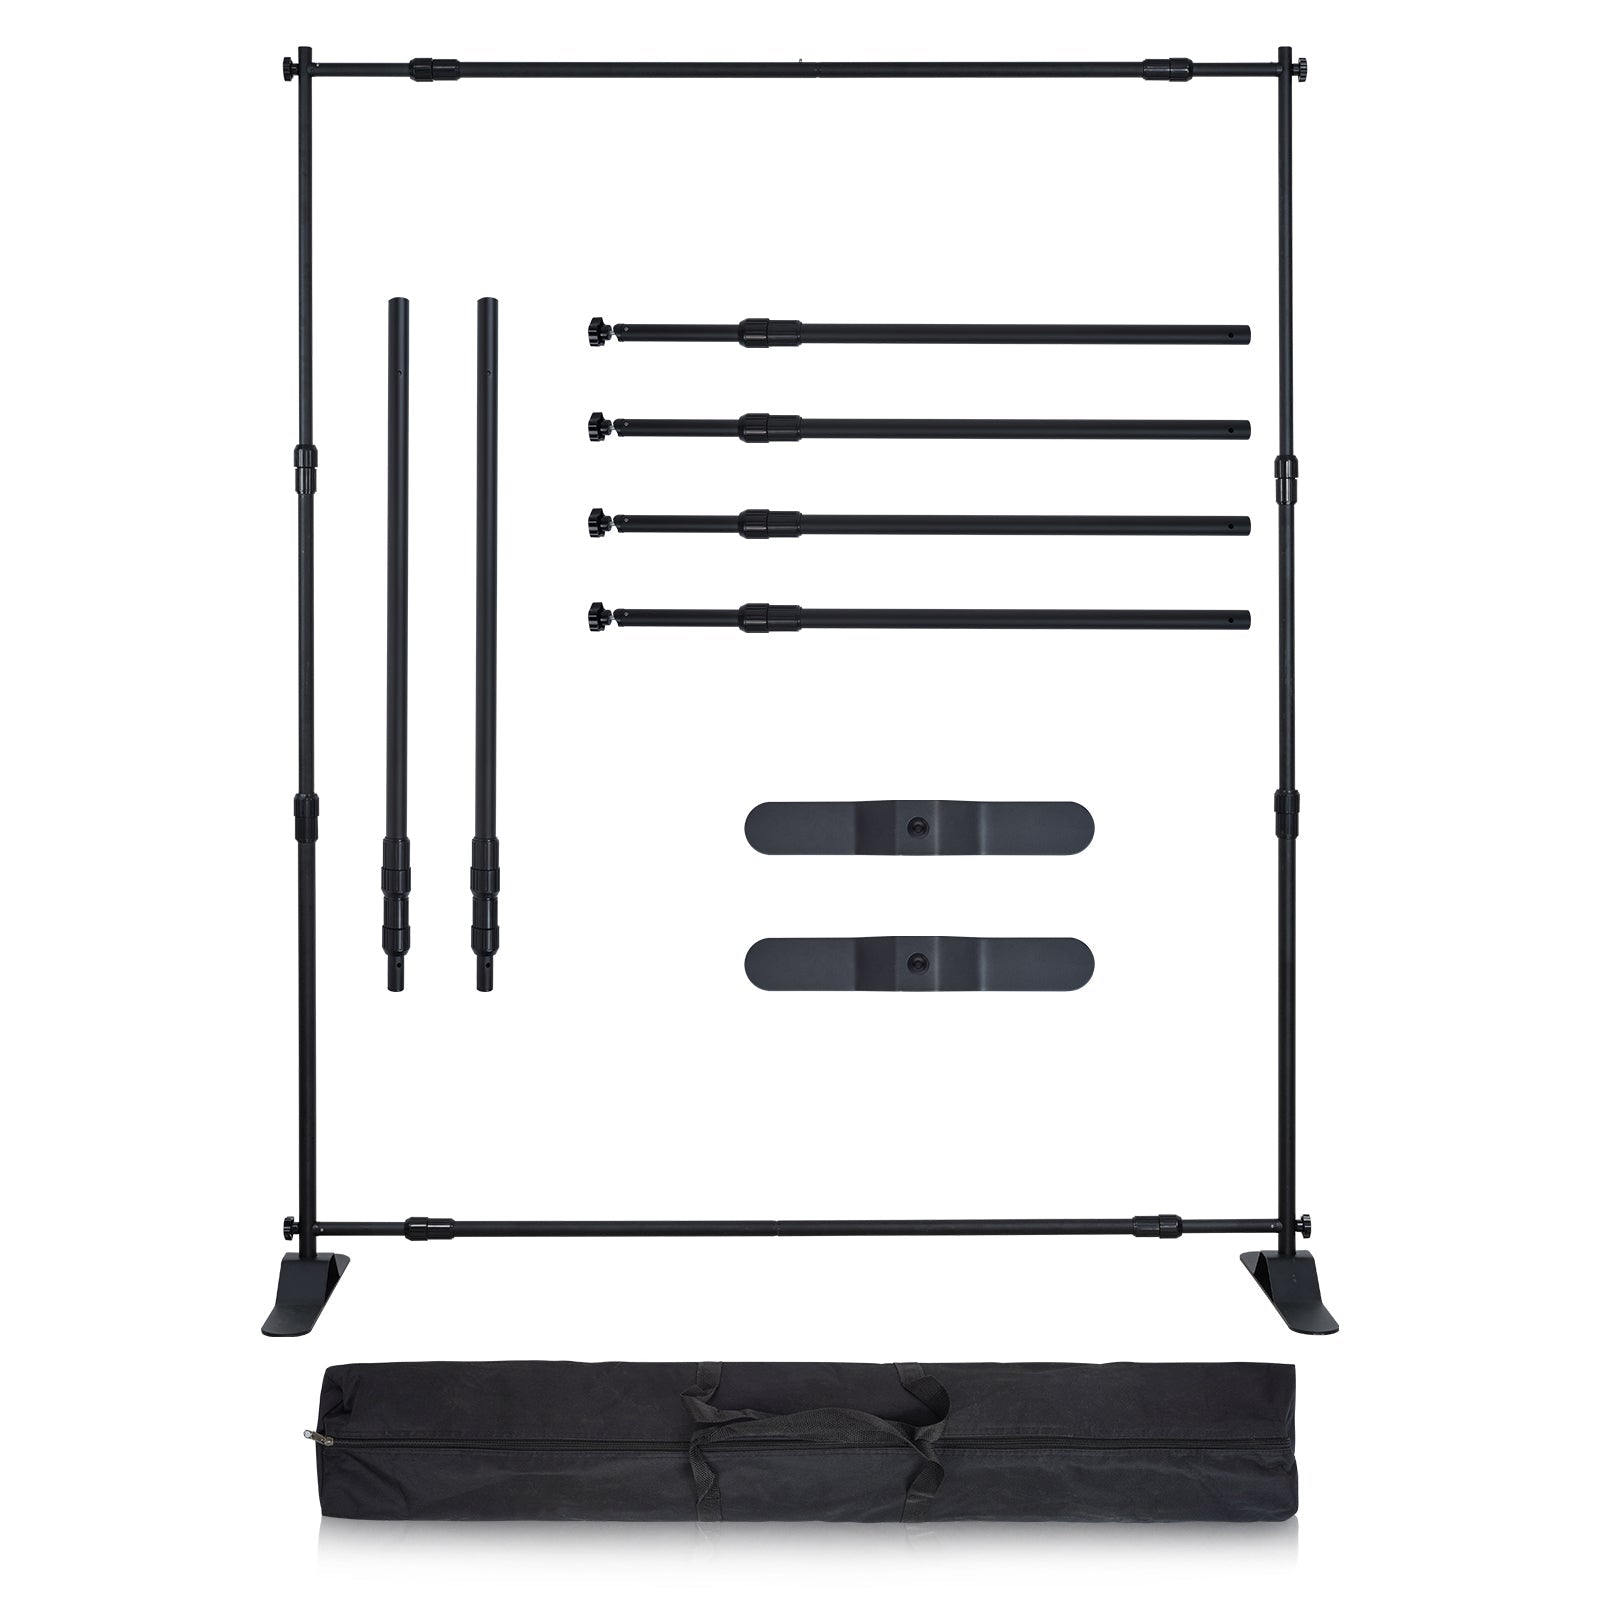 Kate 20x10ft (6x3m) Photography Backdrop Frame Stand Kit for Room Set  (including 8 clips + one carrying case)